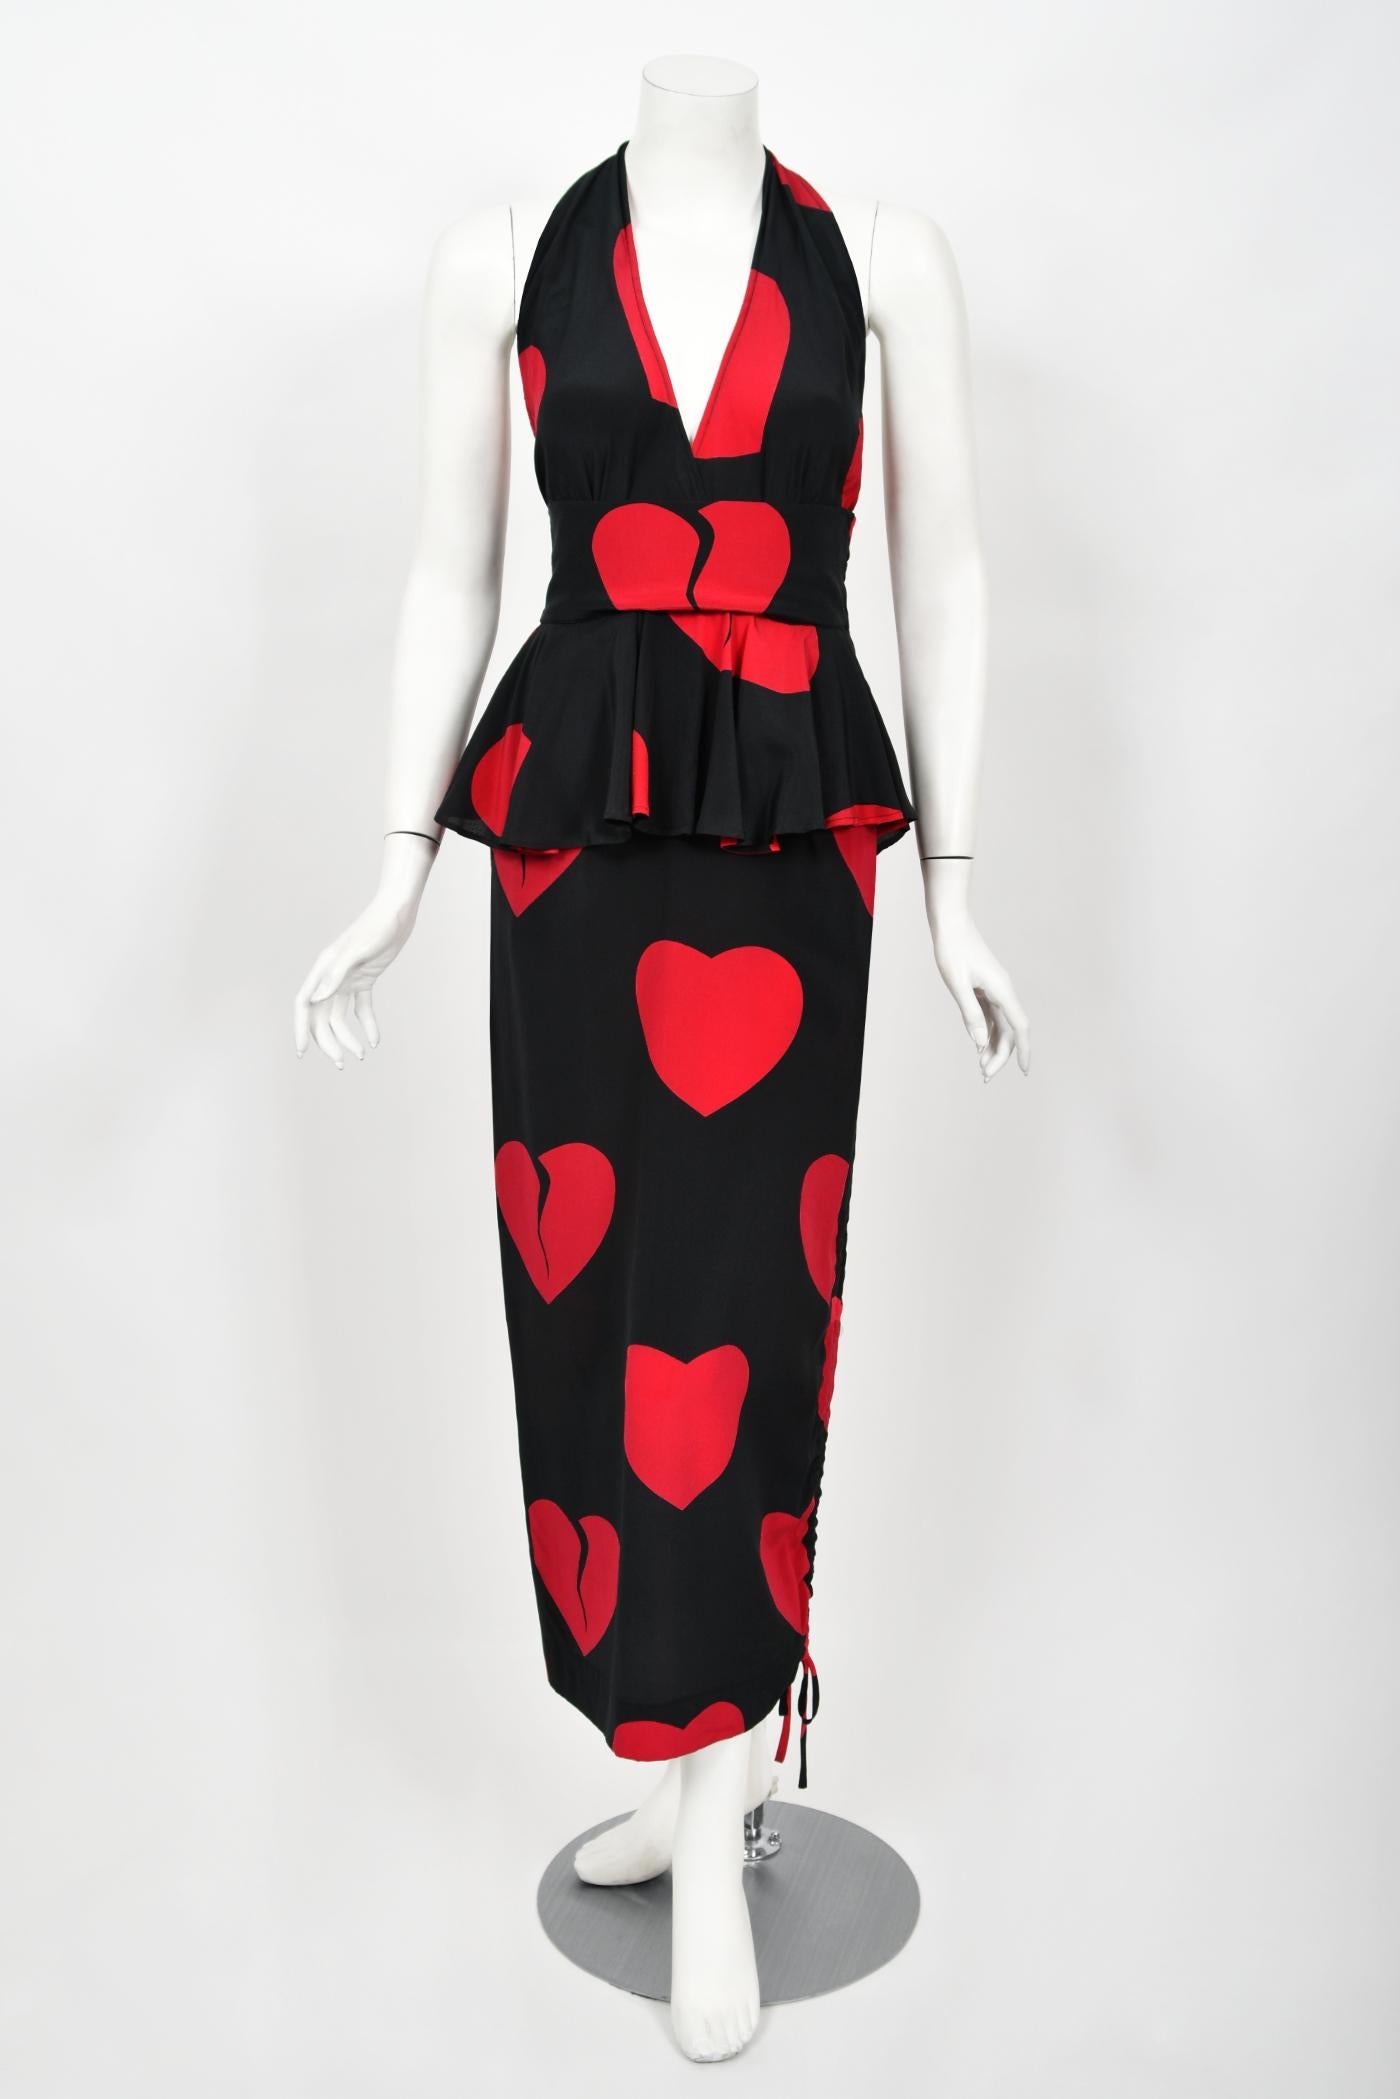 1994 Moschino Couture Documented 'Heartbreaker' Print Silk Convertible Dress  For Sale 3